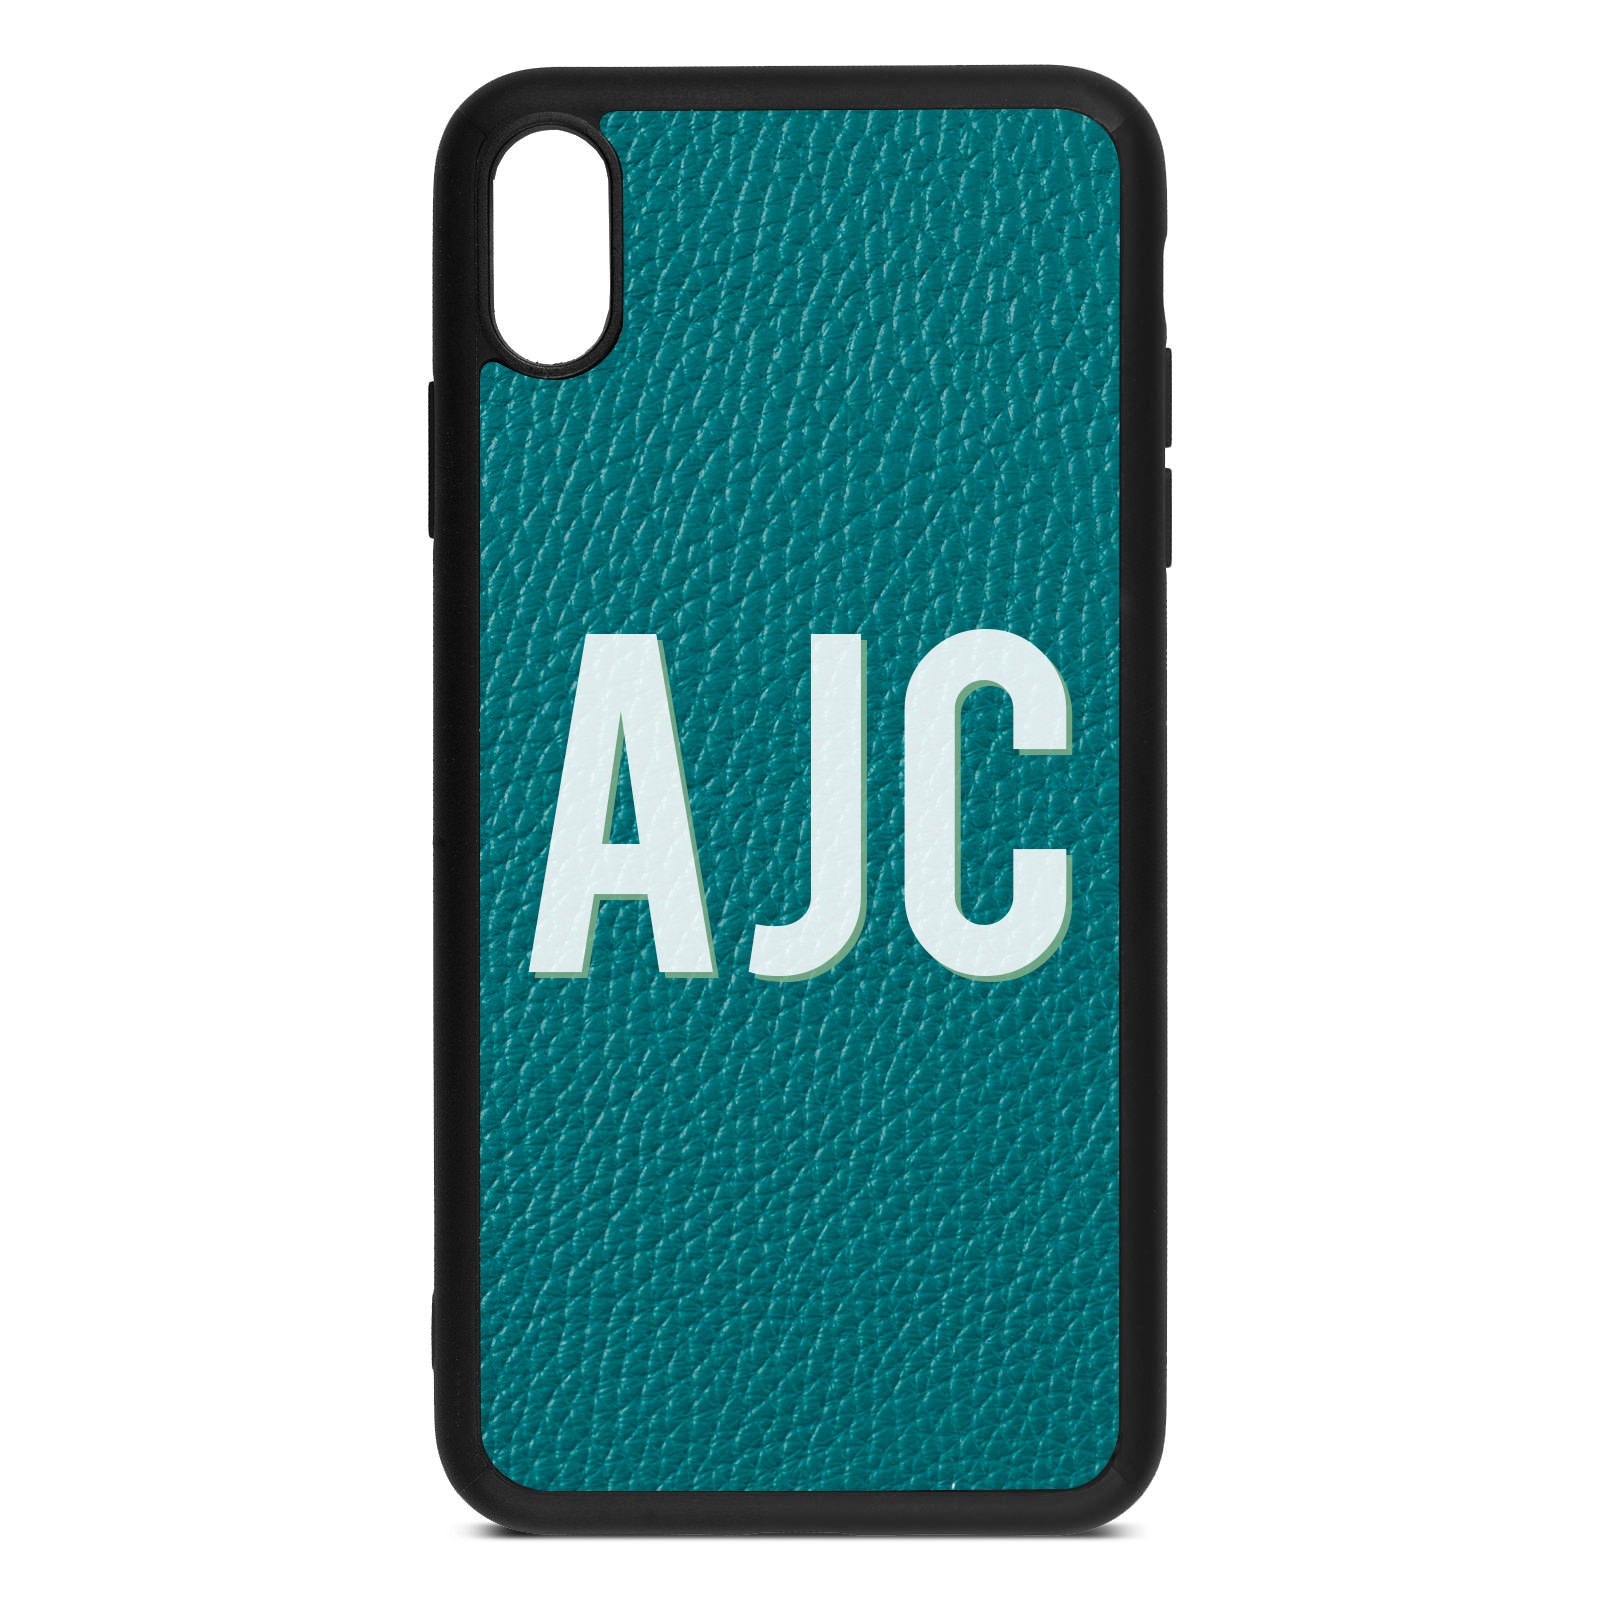 iPhone Xs Max Pebble Green Leather iPhone Case